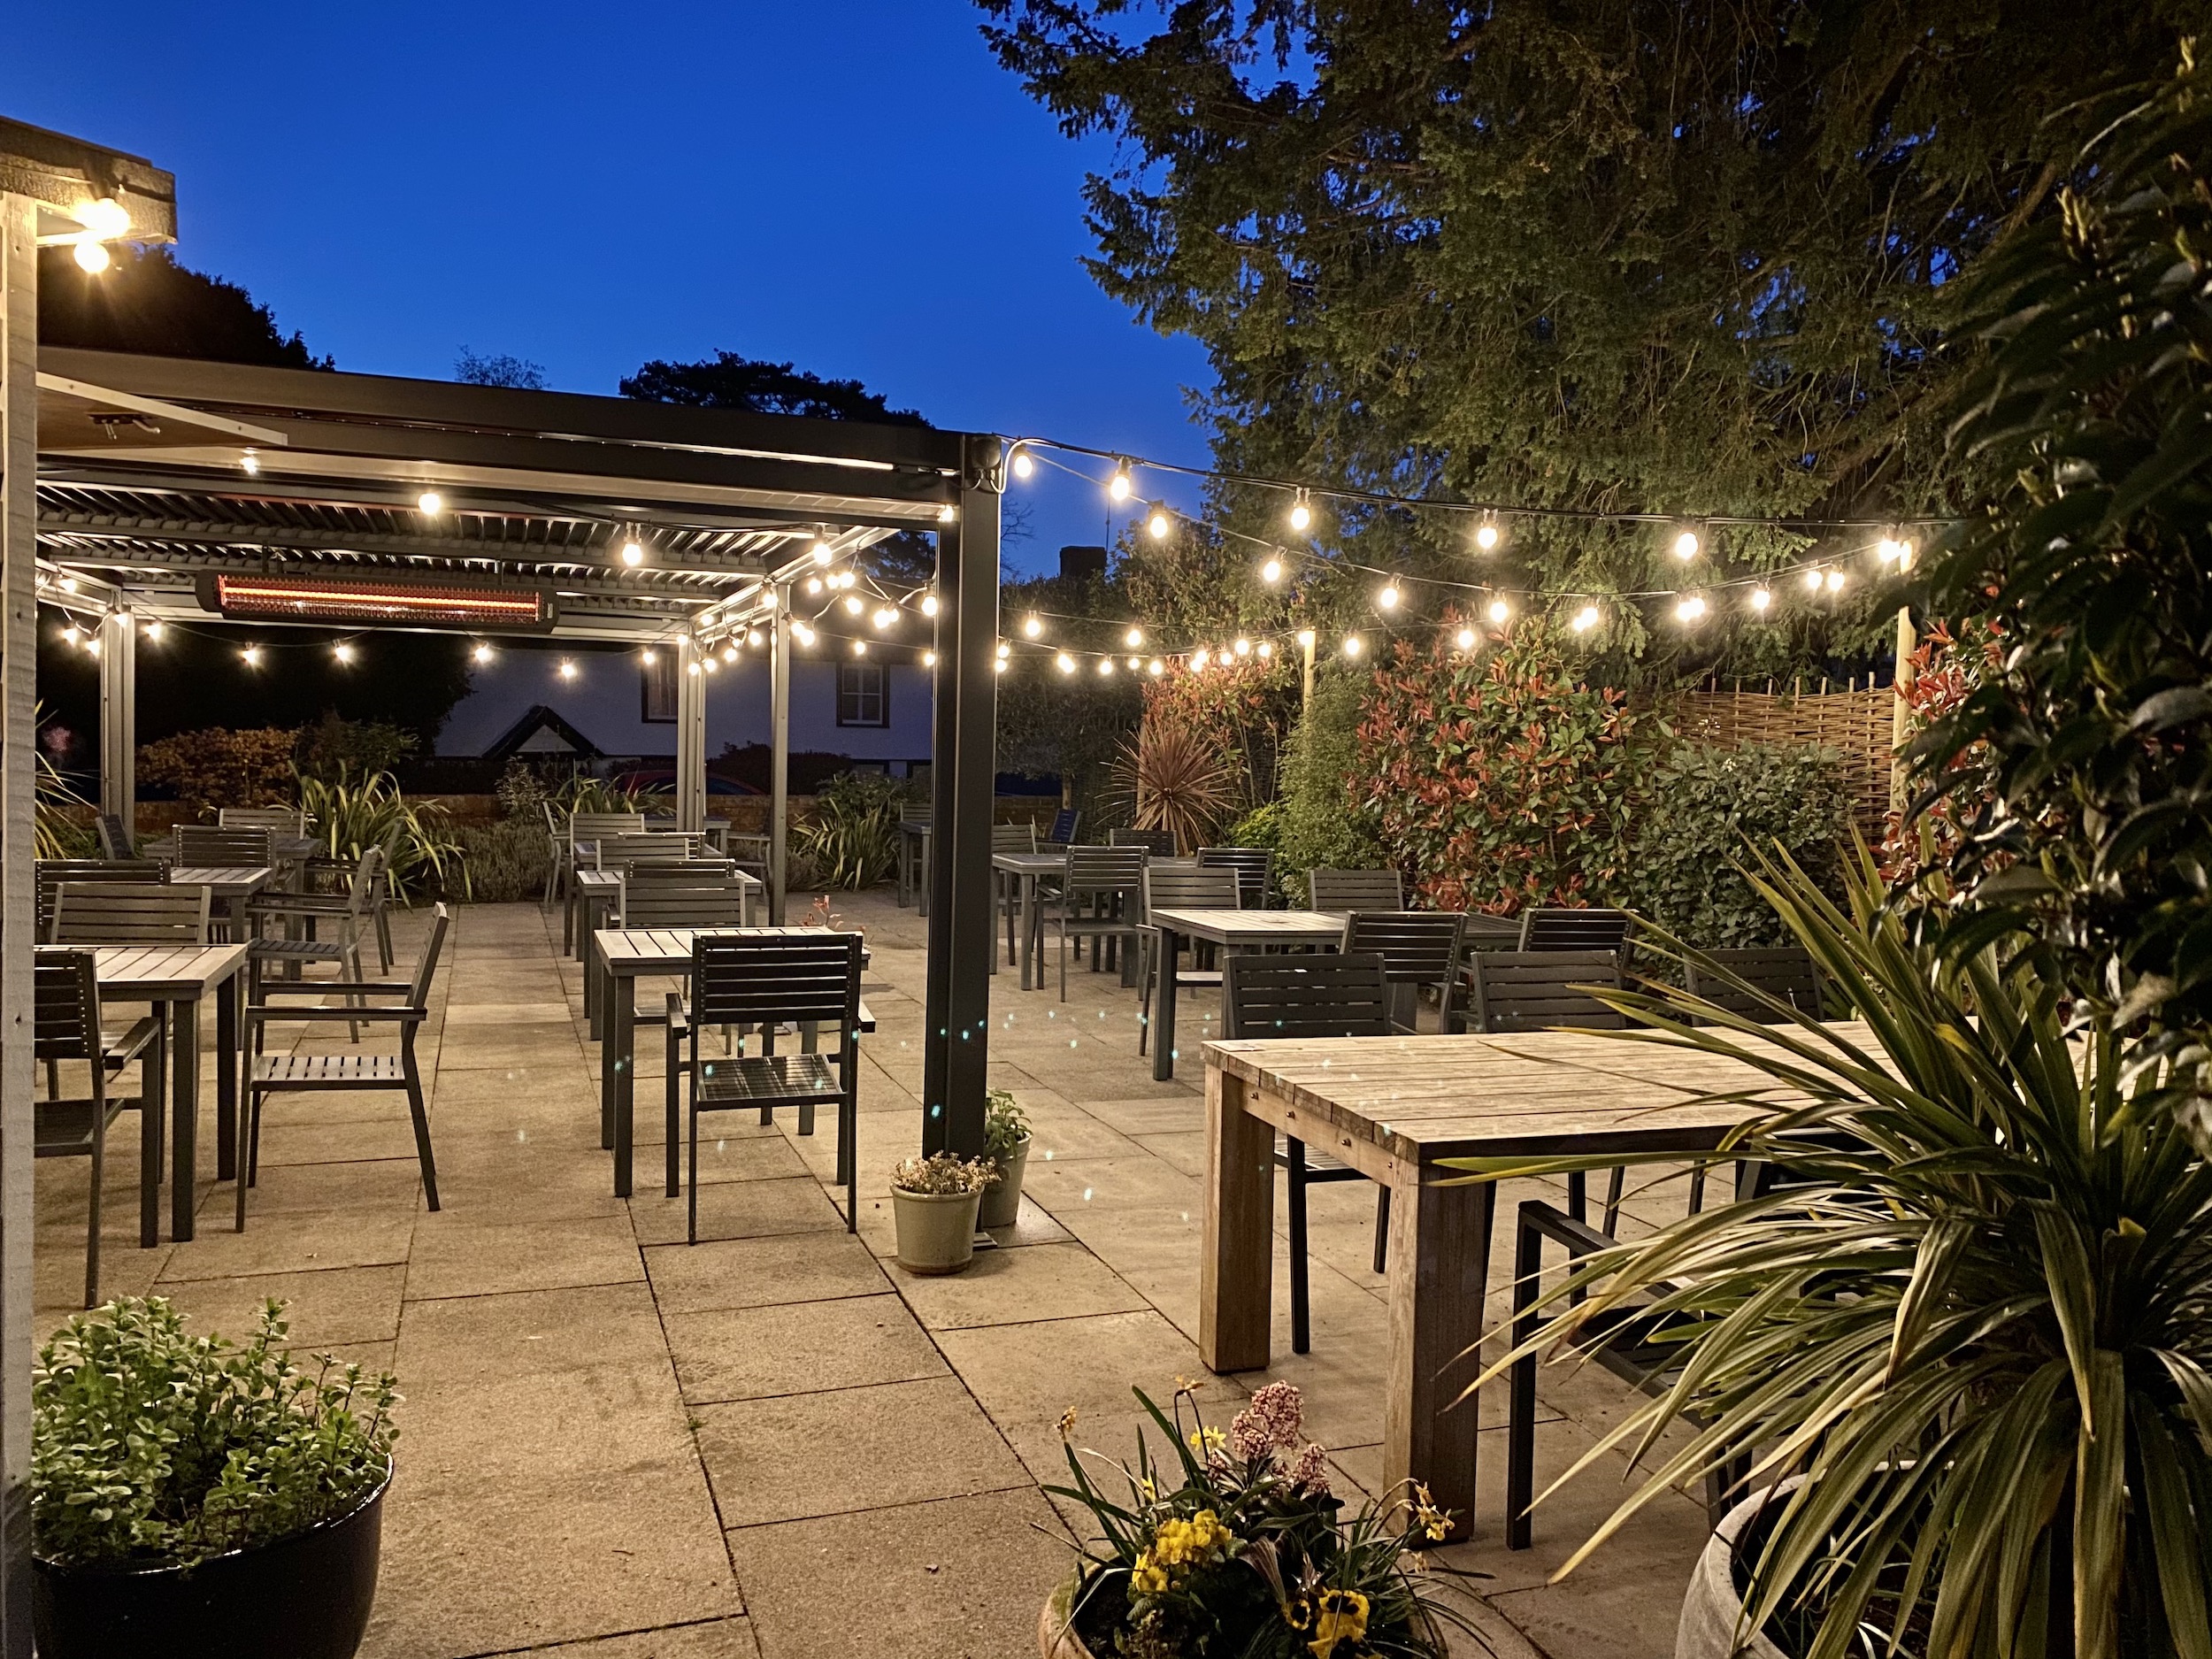 Outdoor dining and drinking in Hertfordshire